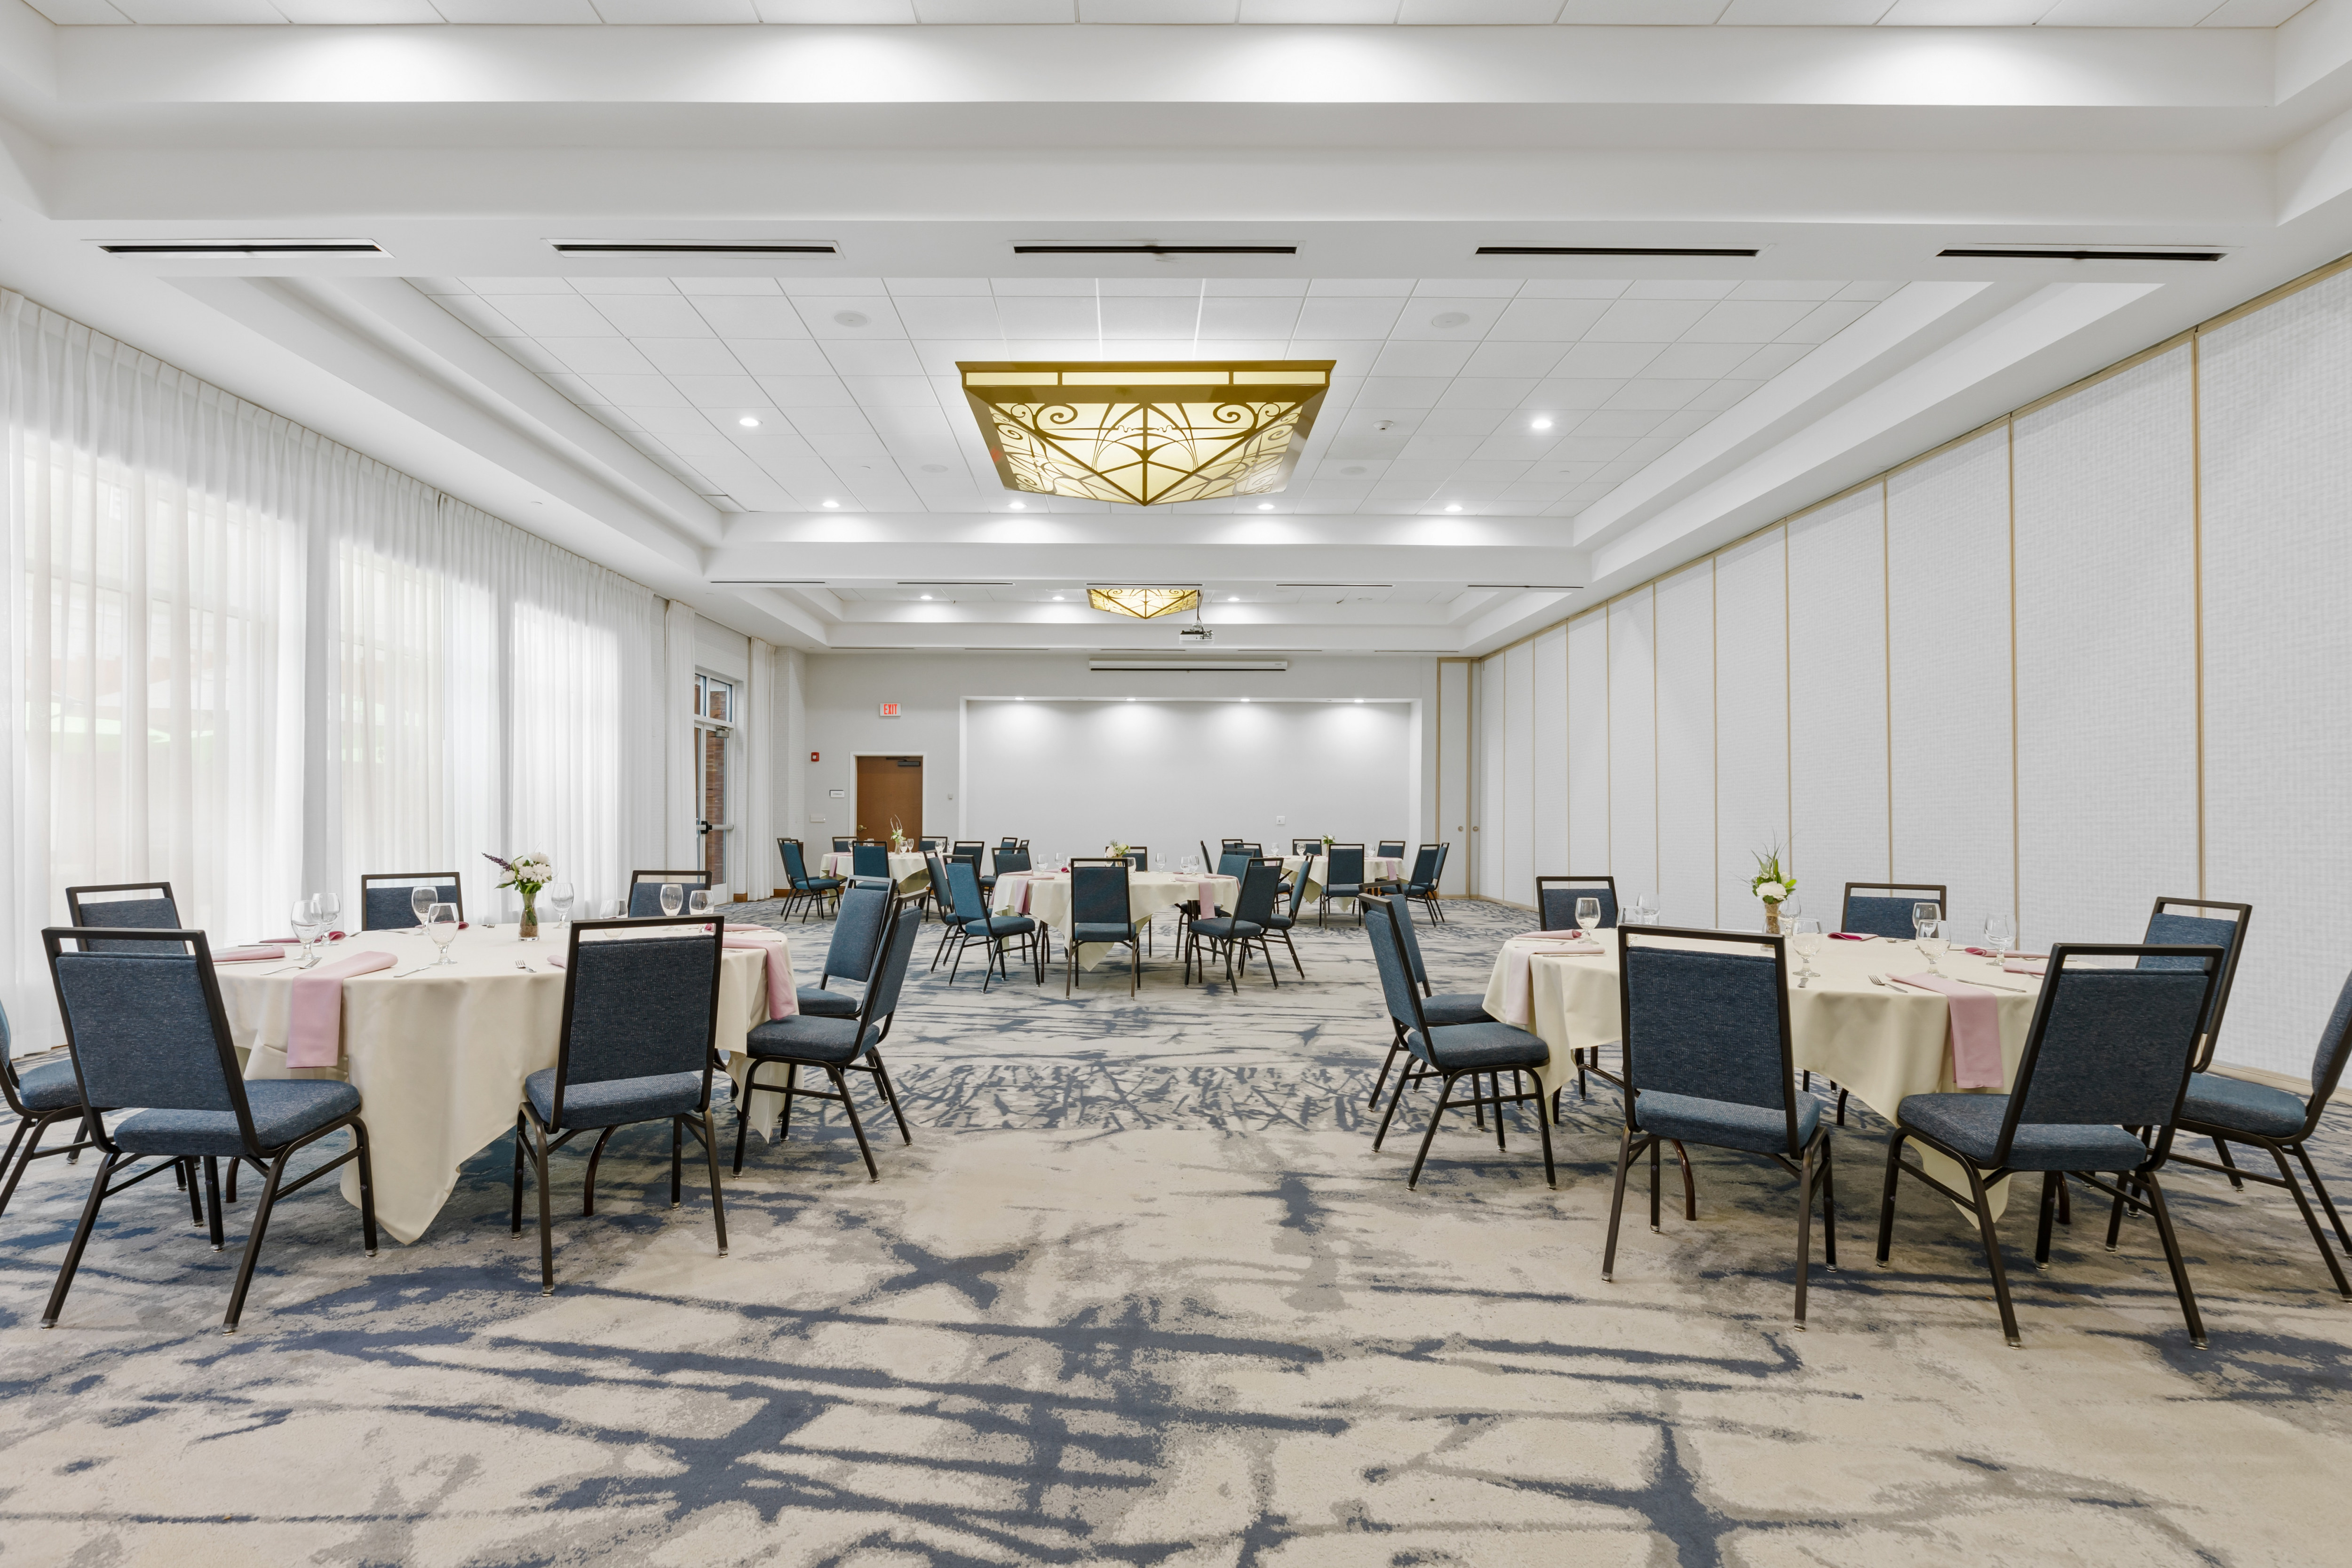 Reisling meeting room, banquet round tables